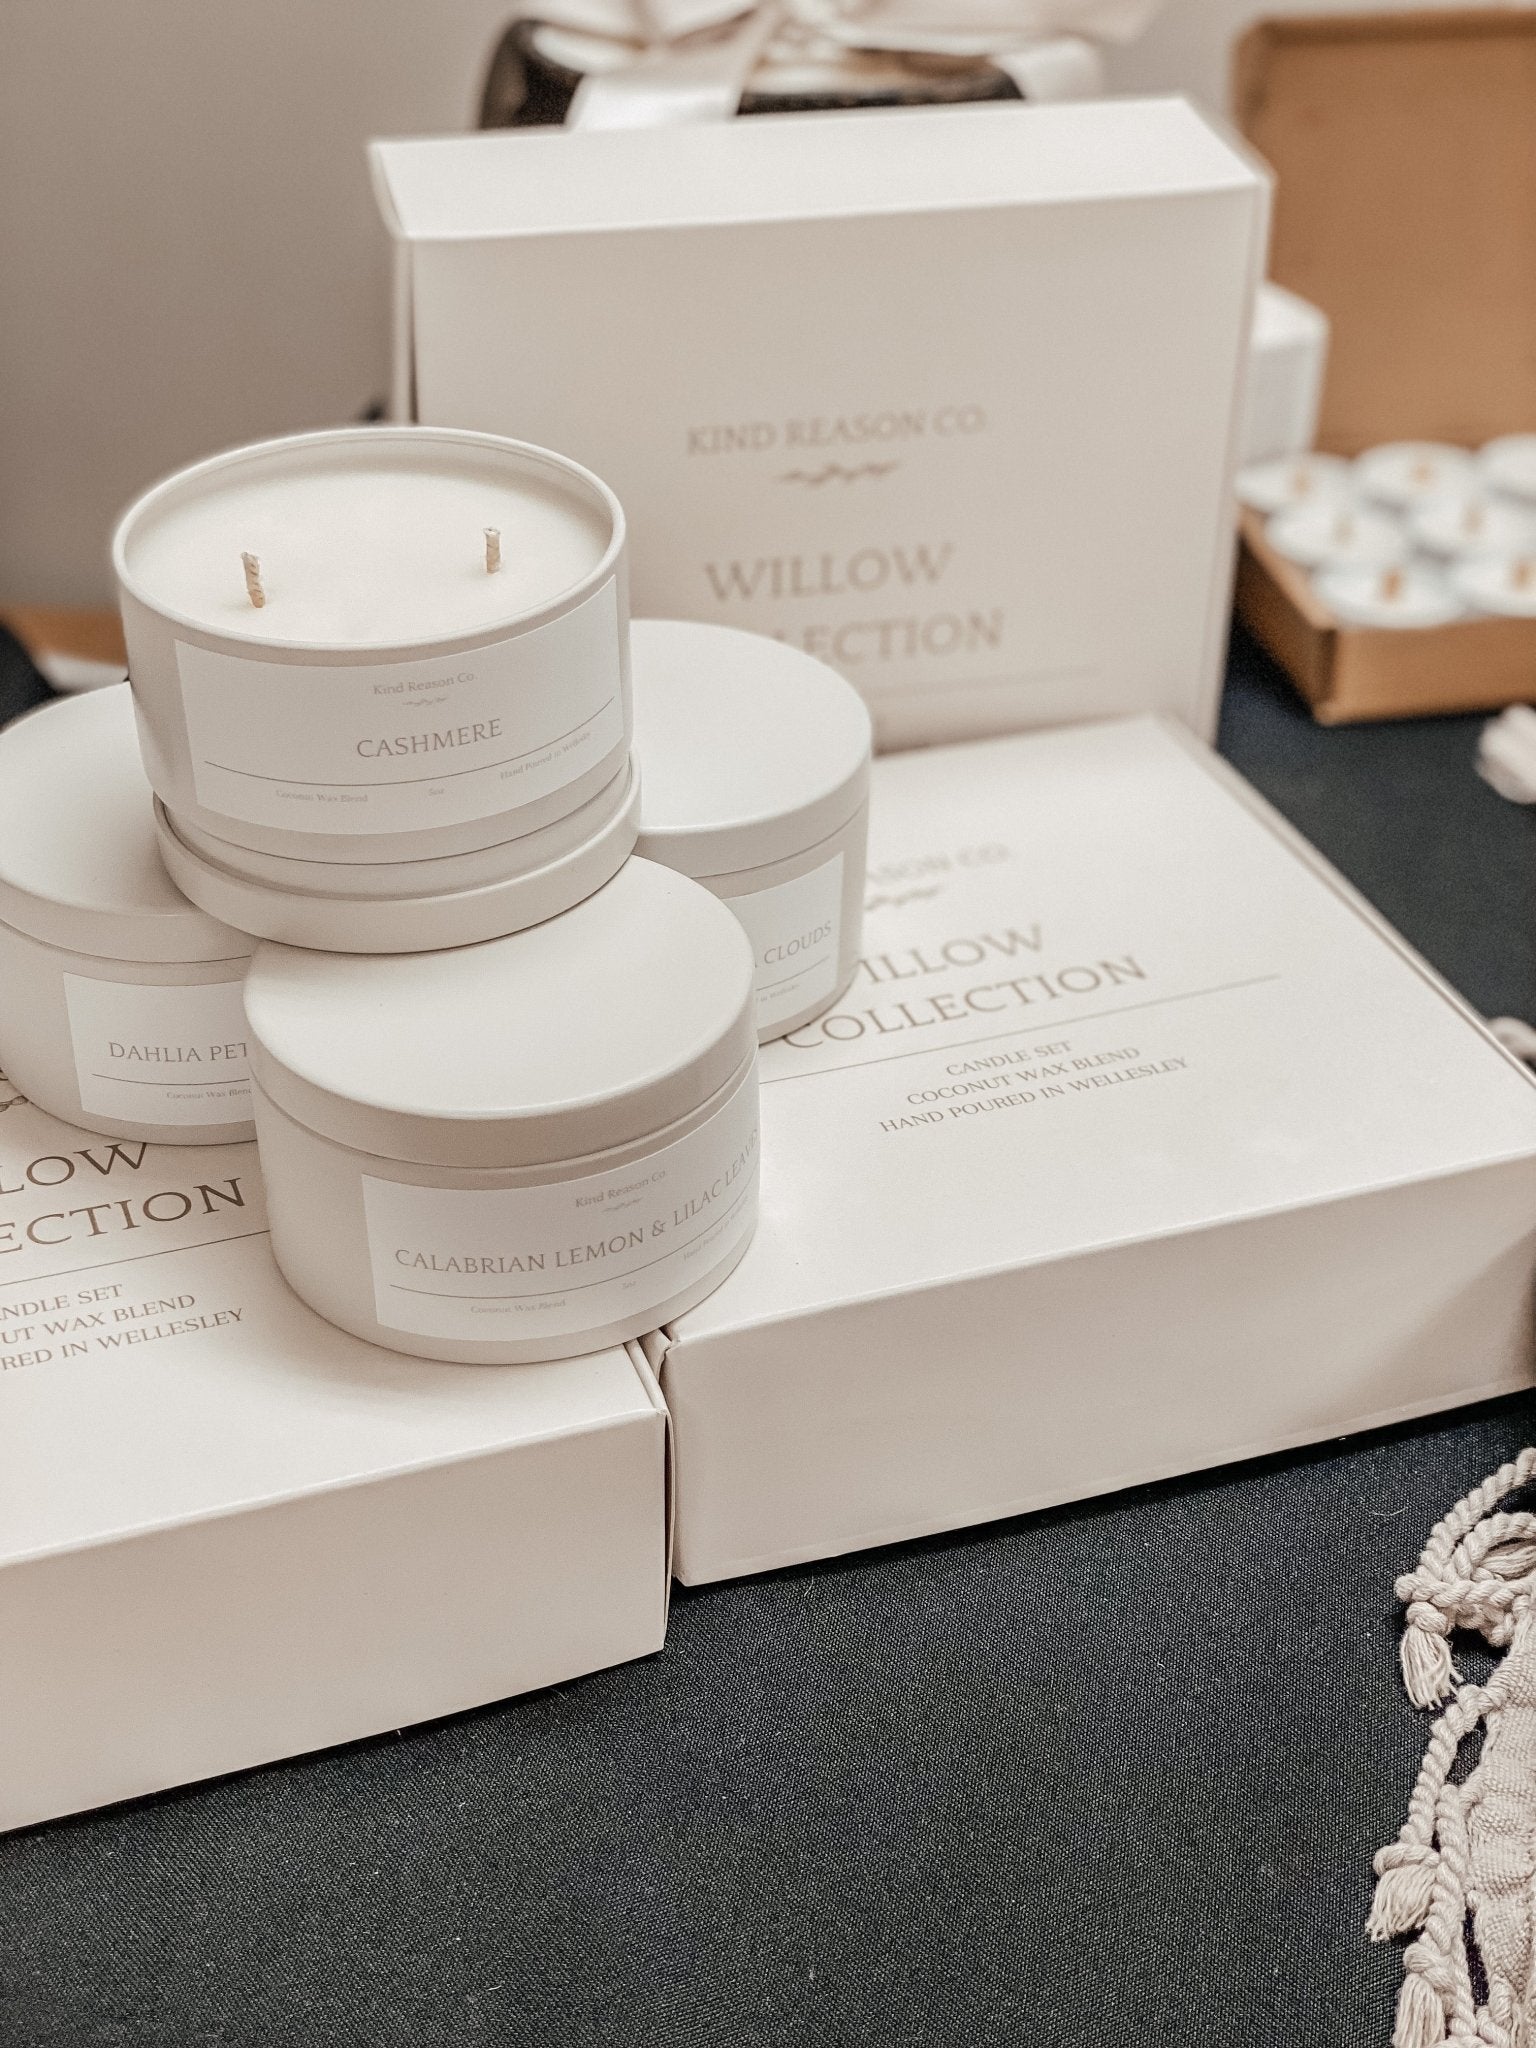 The Willow Collection Box - Kind Reason Co.